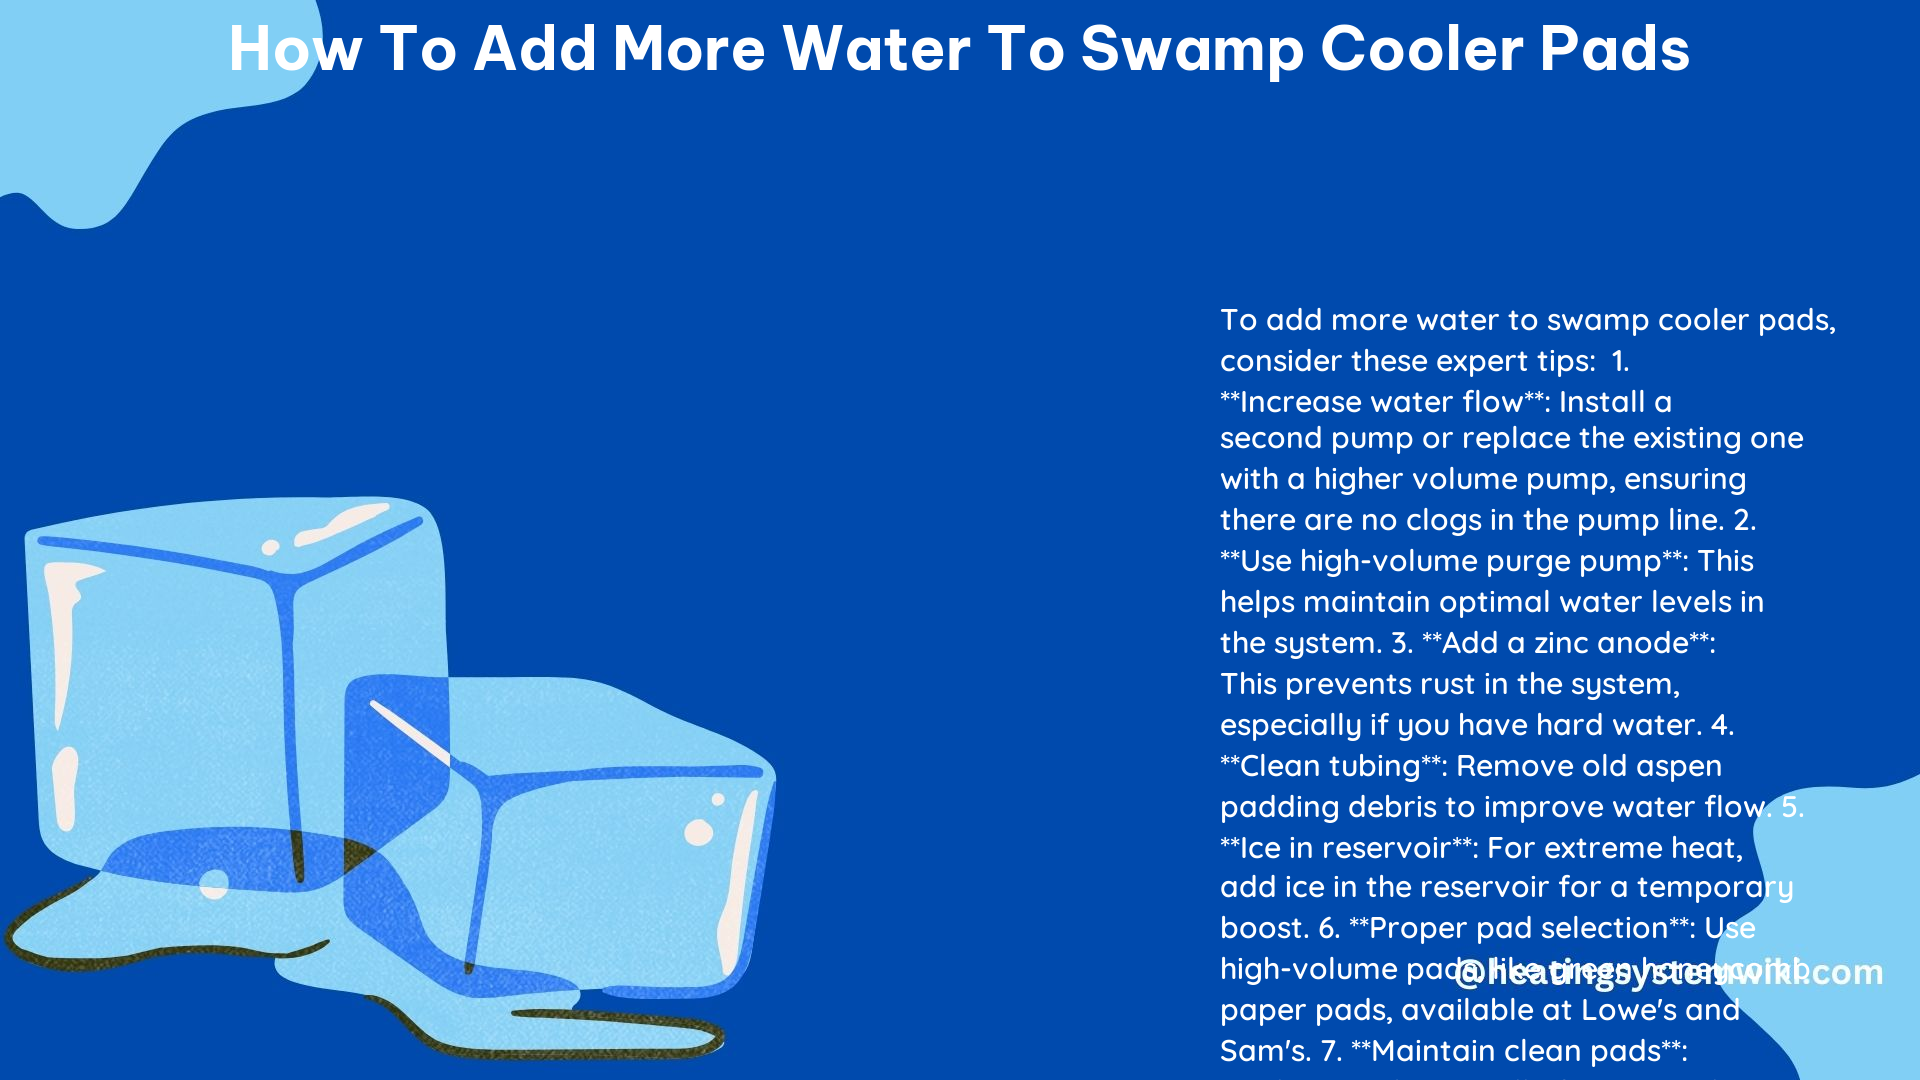 How to Add More Water to Swamp Cooler Pads